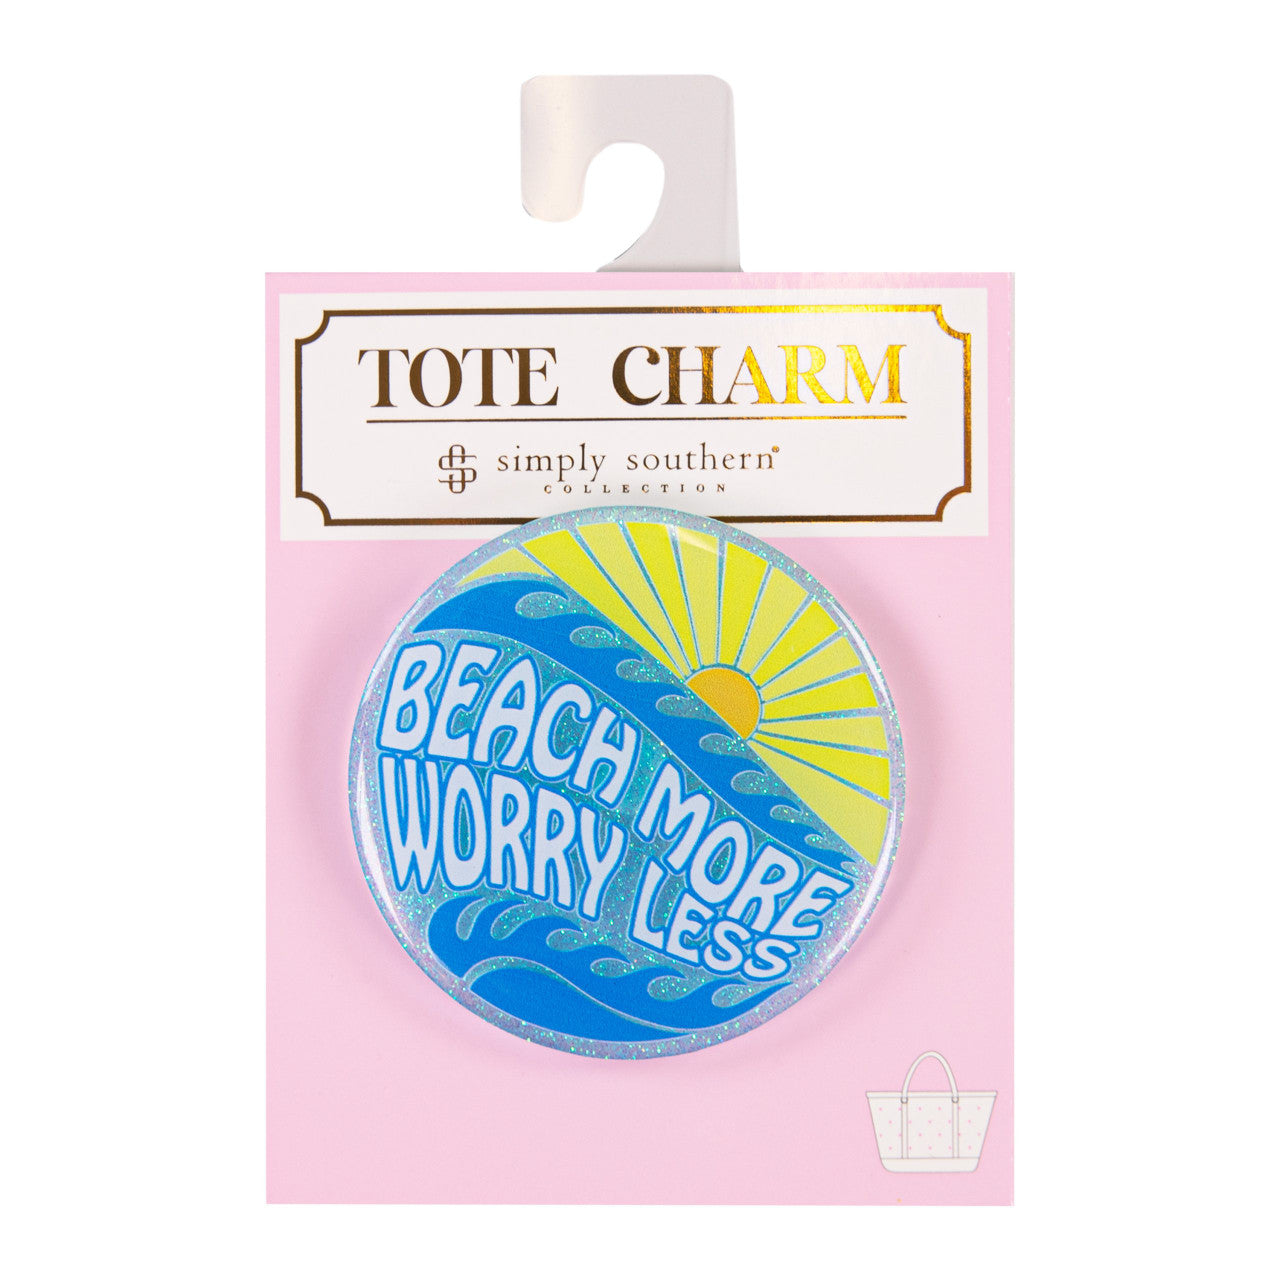 Worry Less Simply Southern Tote Charm